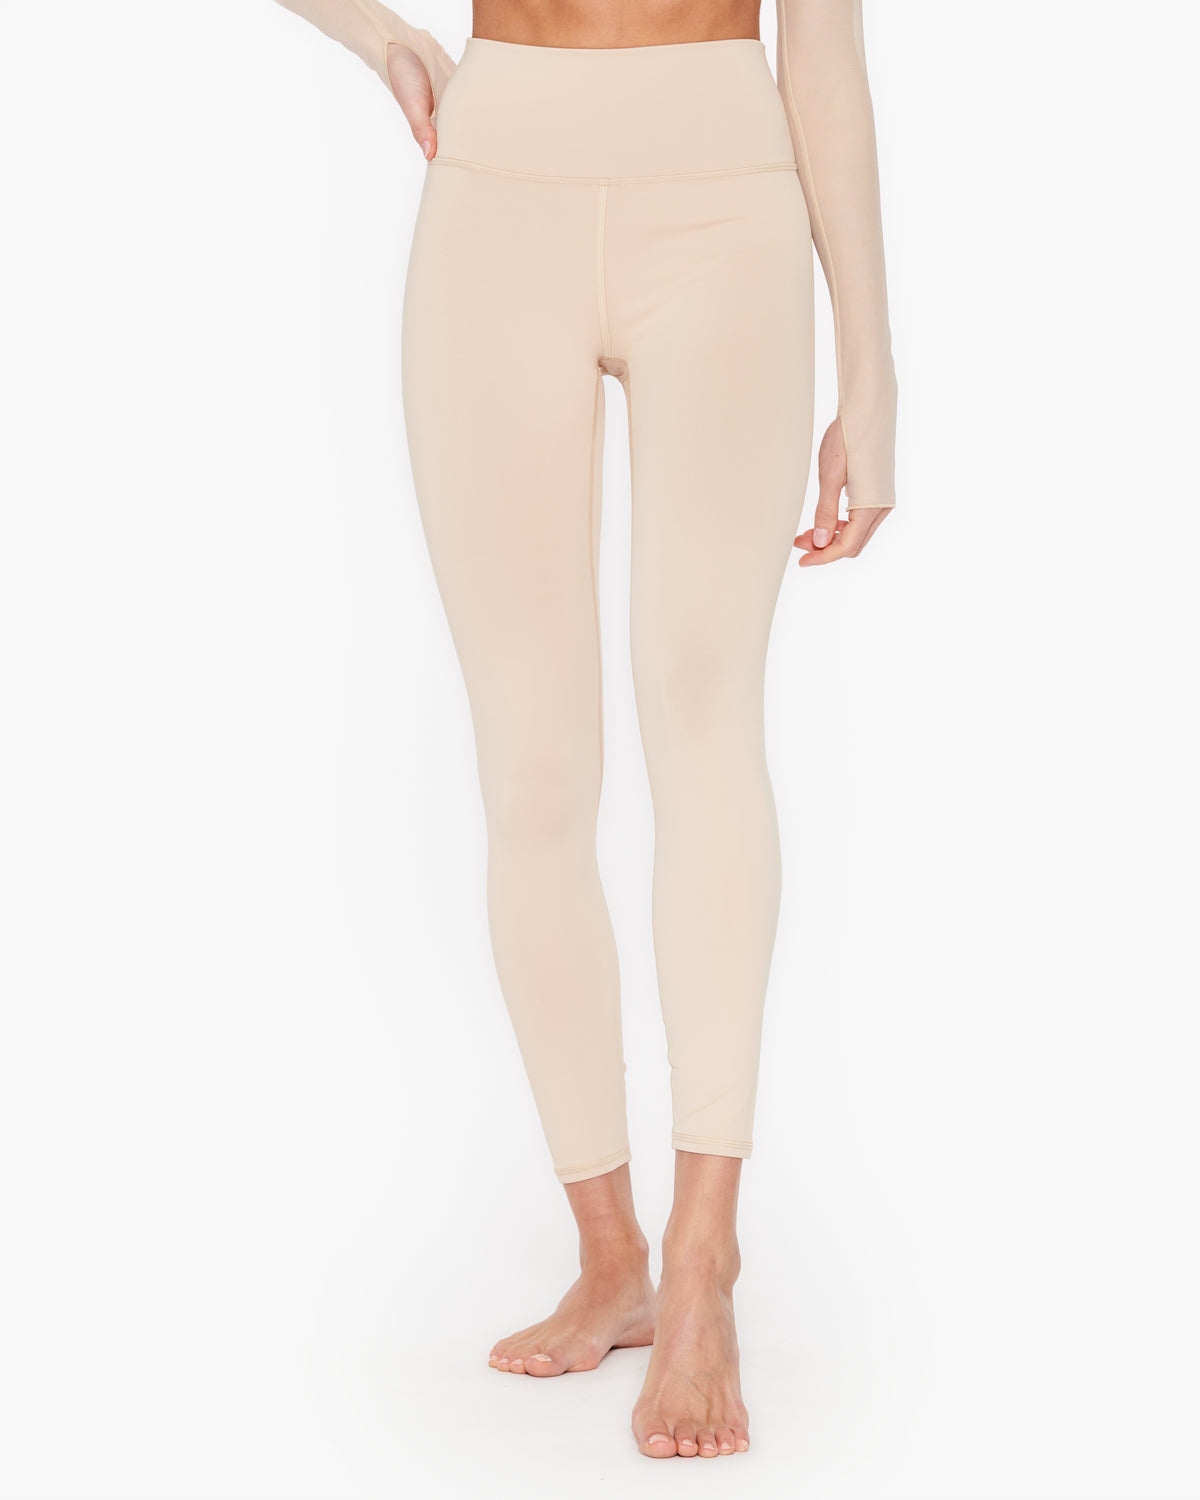 NWT! $114 Alo 7/8 High-Waist Airlift Legging, color woodrose, size Large